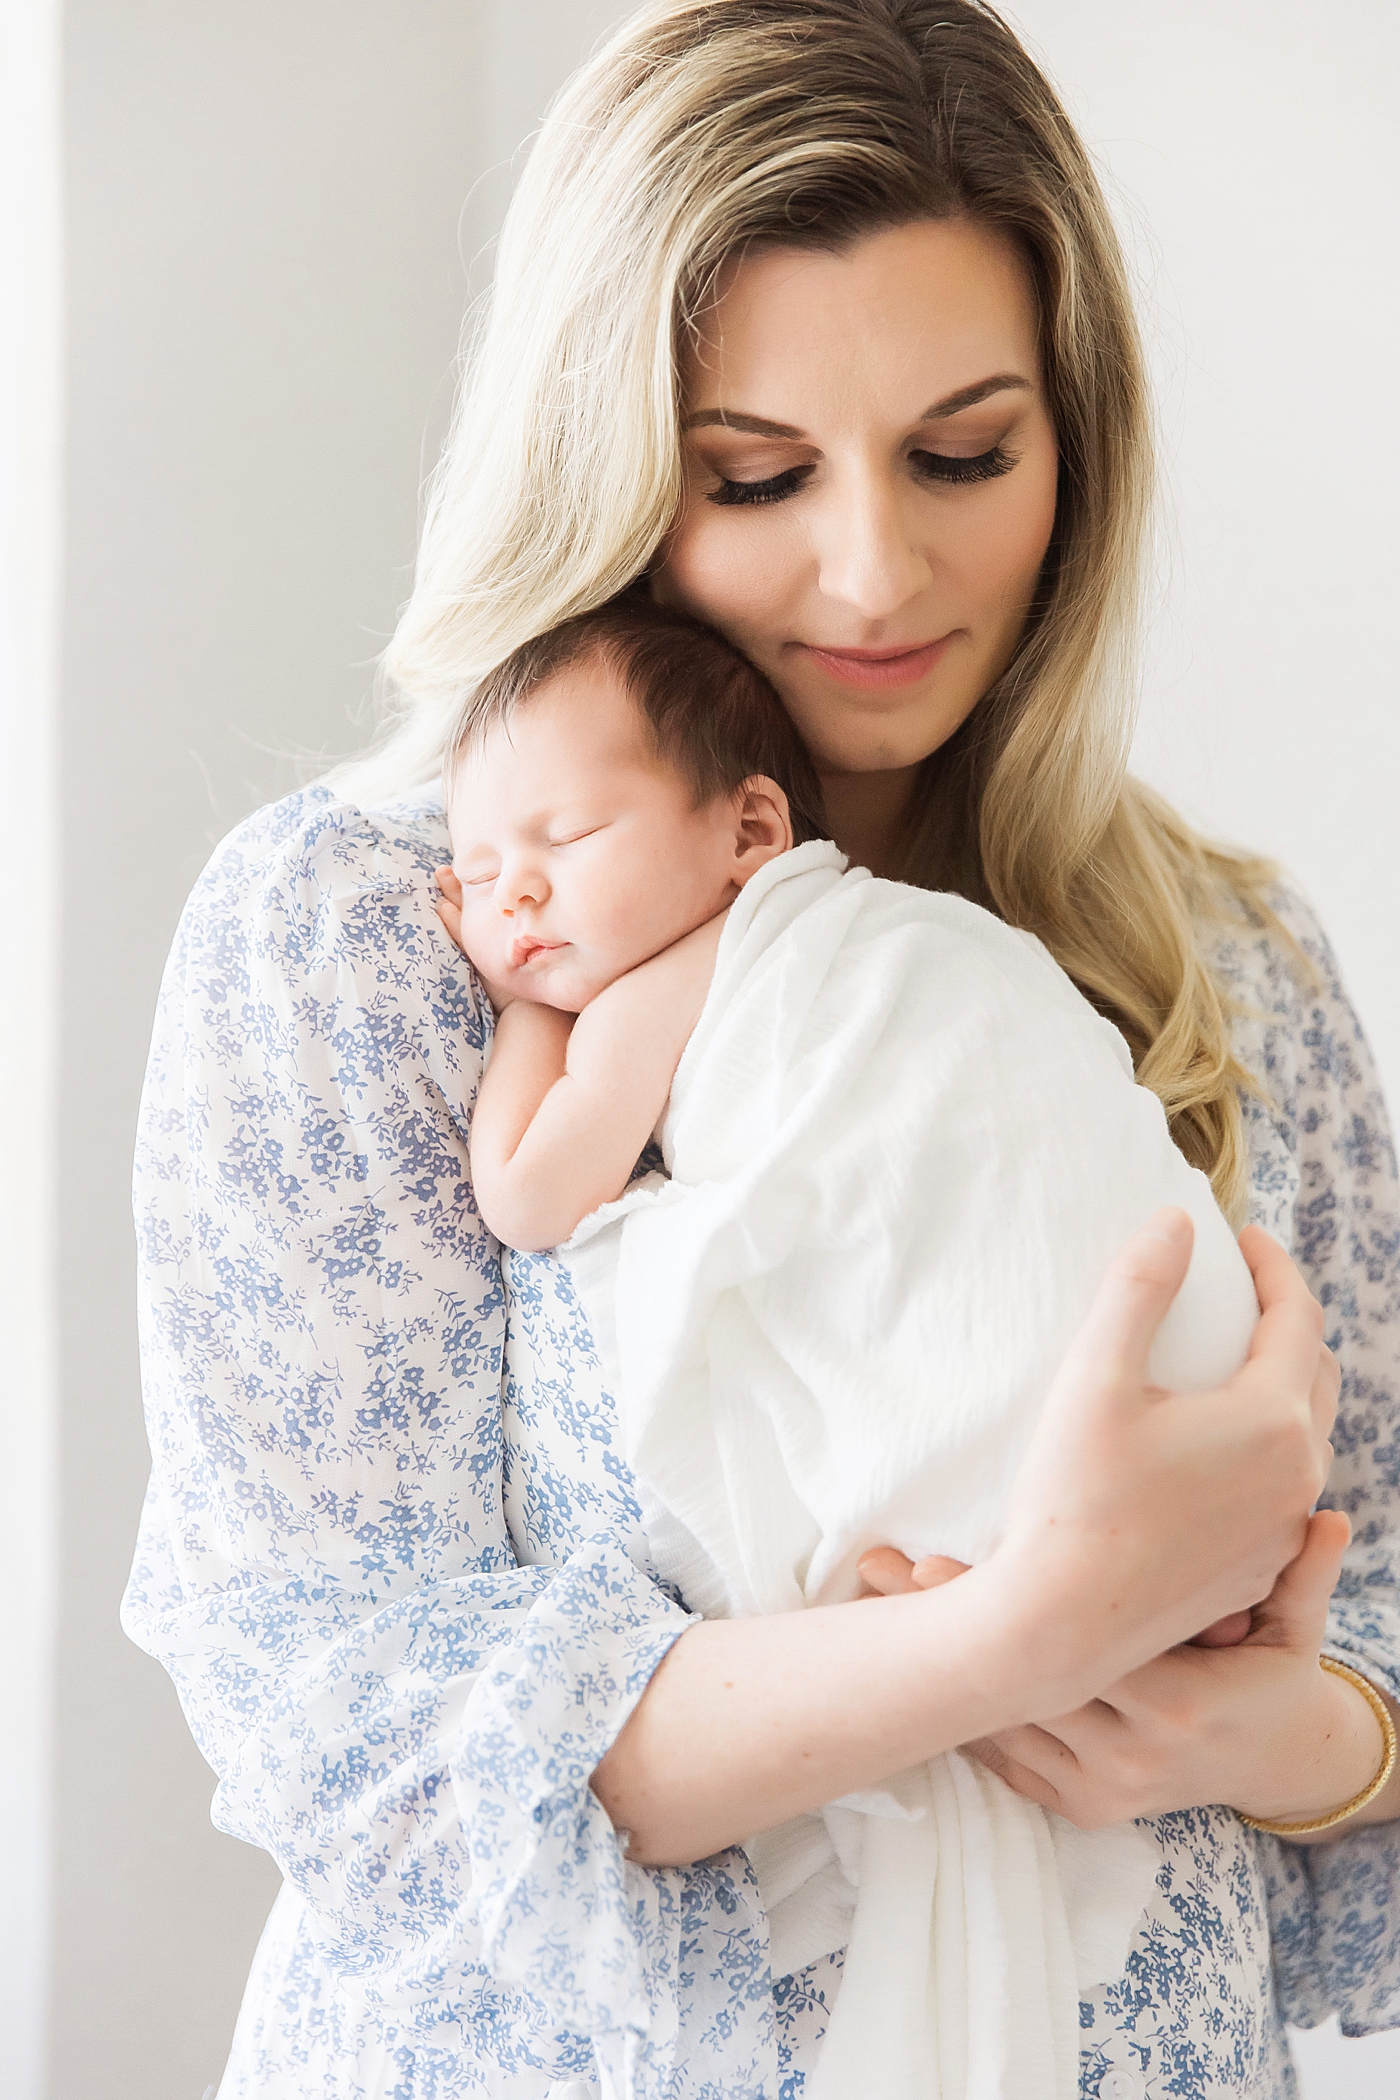 Mom holding sleeping baby on chest for newborn photos with Fresh Light Photography.